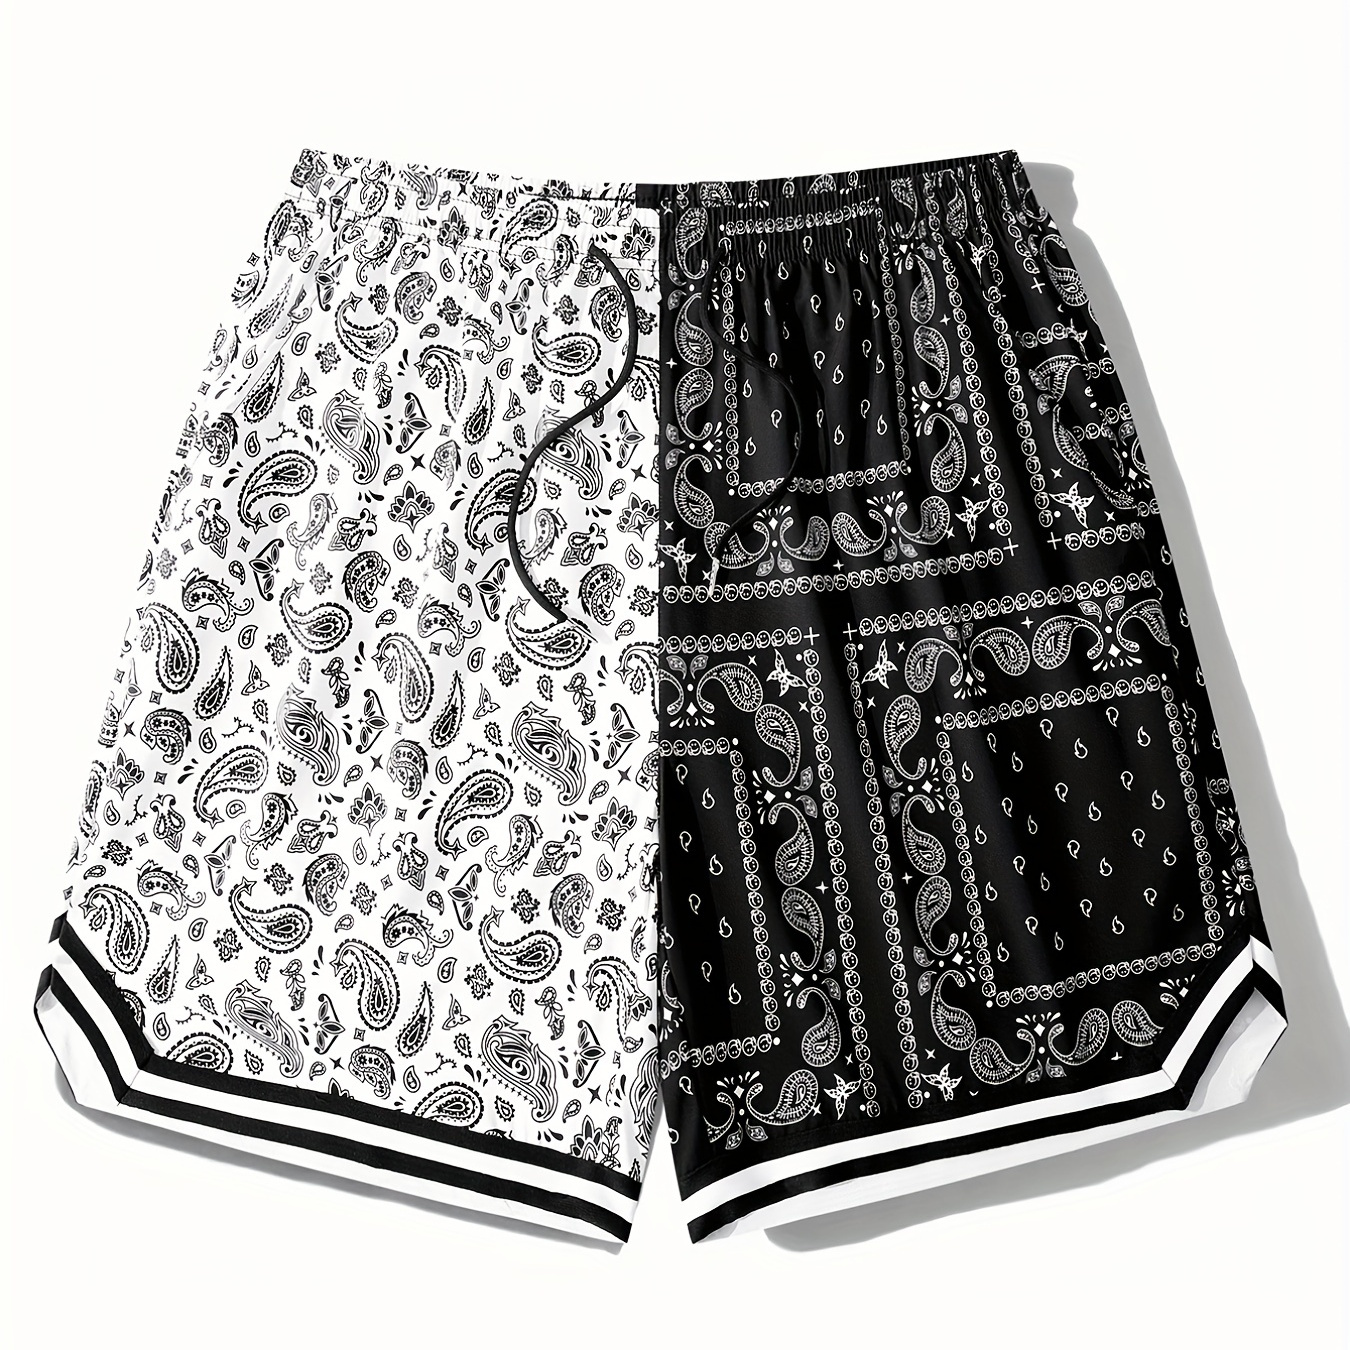 

Trendy Men's Paisley Beach Shorts - Breathable & Comfy Swim Trunks With Elastic Waist & Drawstring For Summer Pool & Outdoor Activities